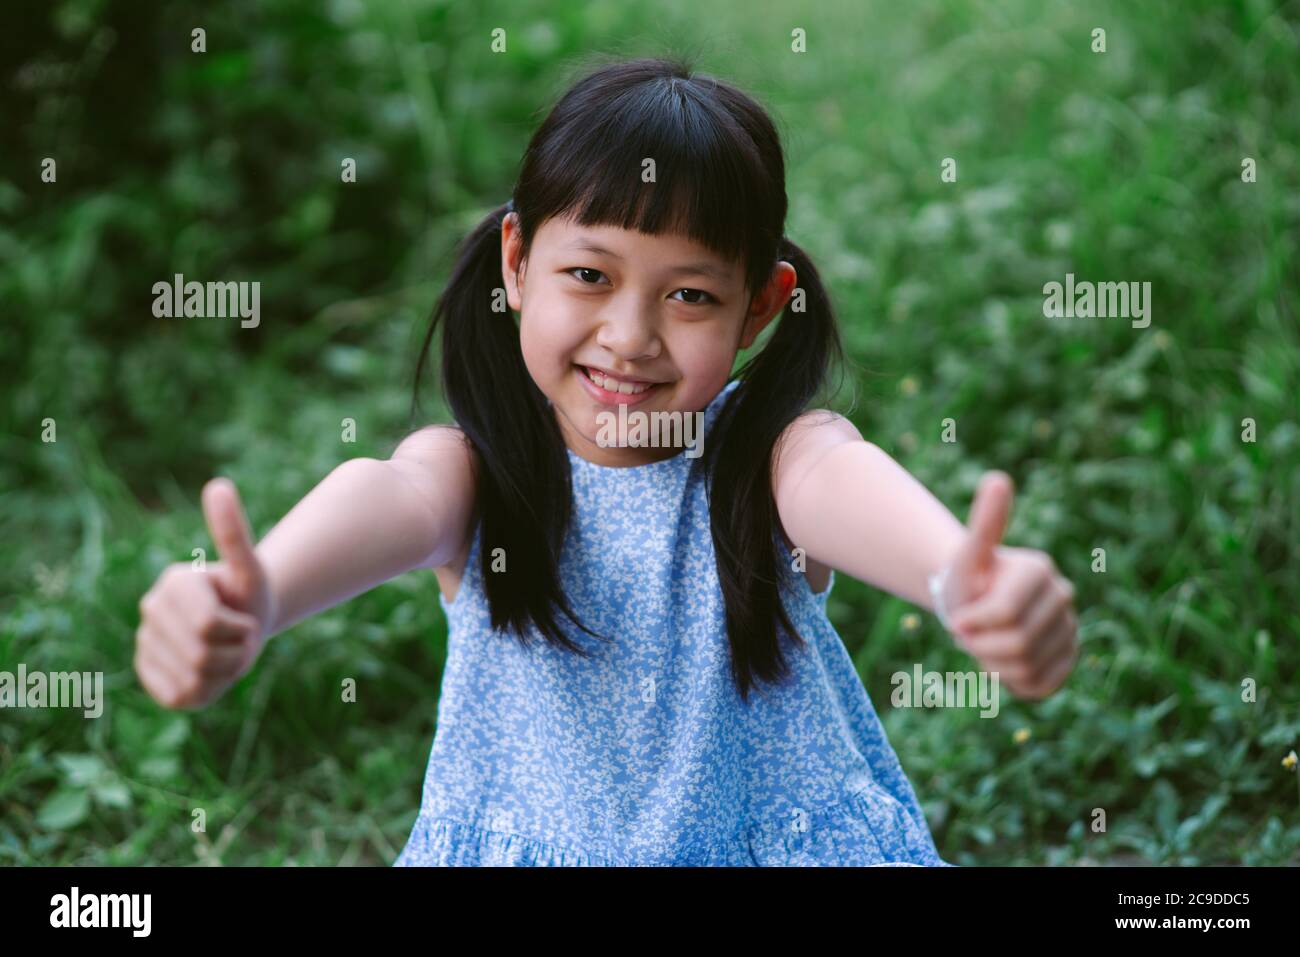 Portrait of a happy smiling asian child girl Stock Photo